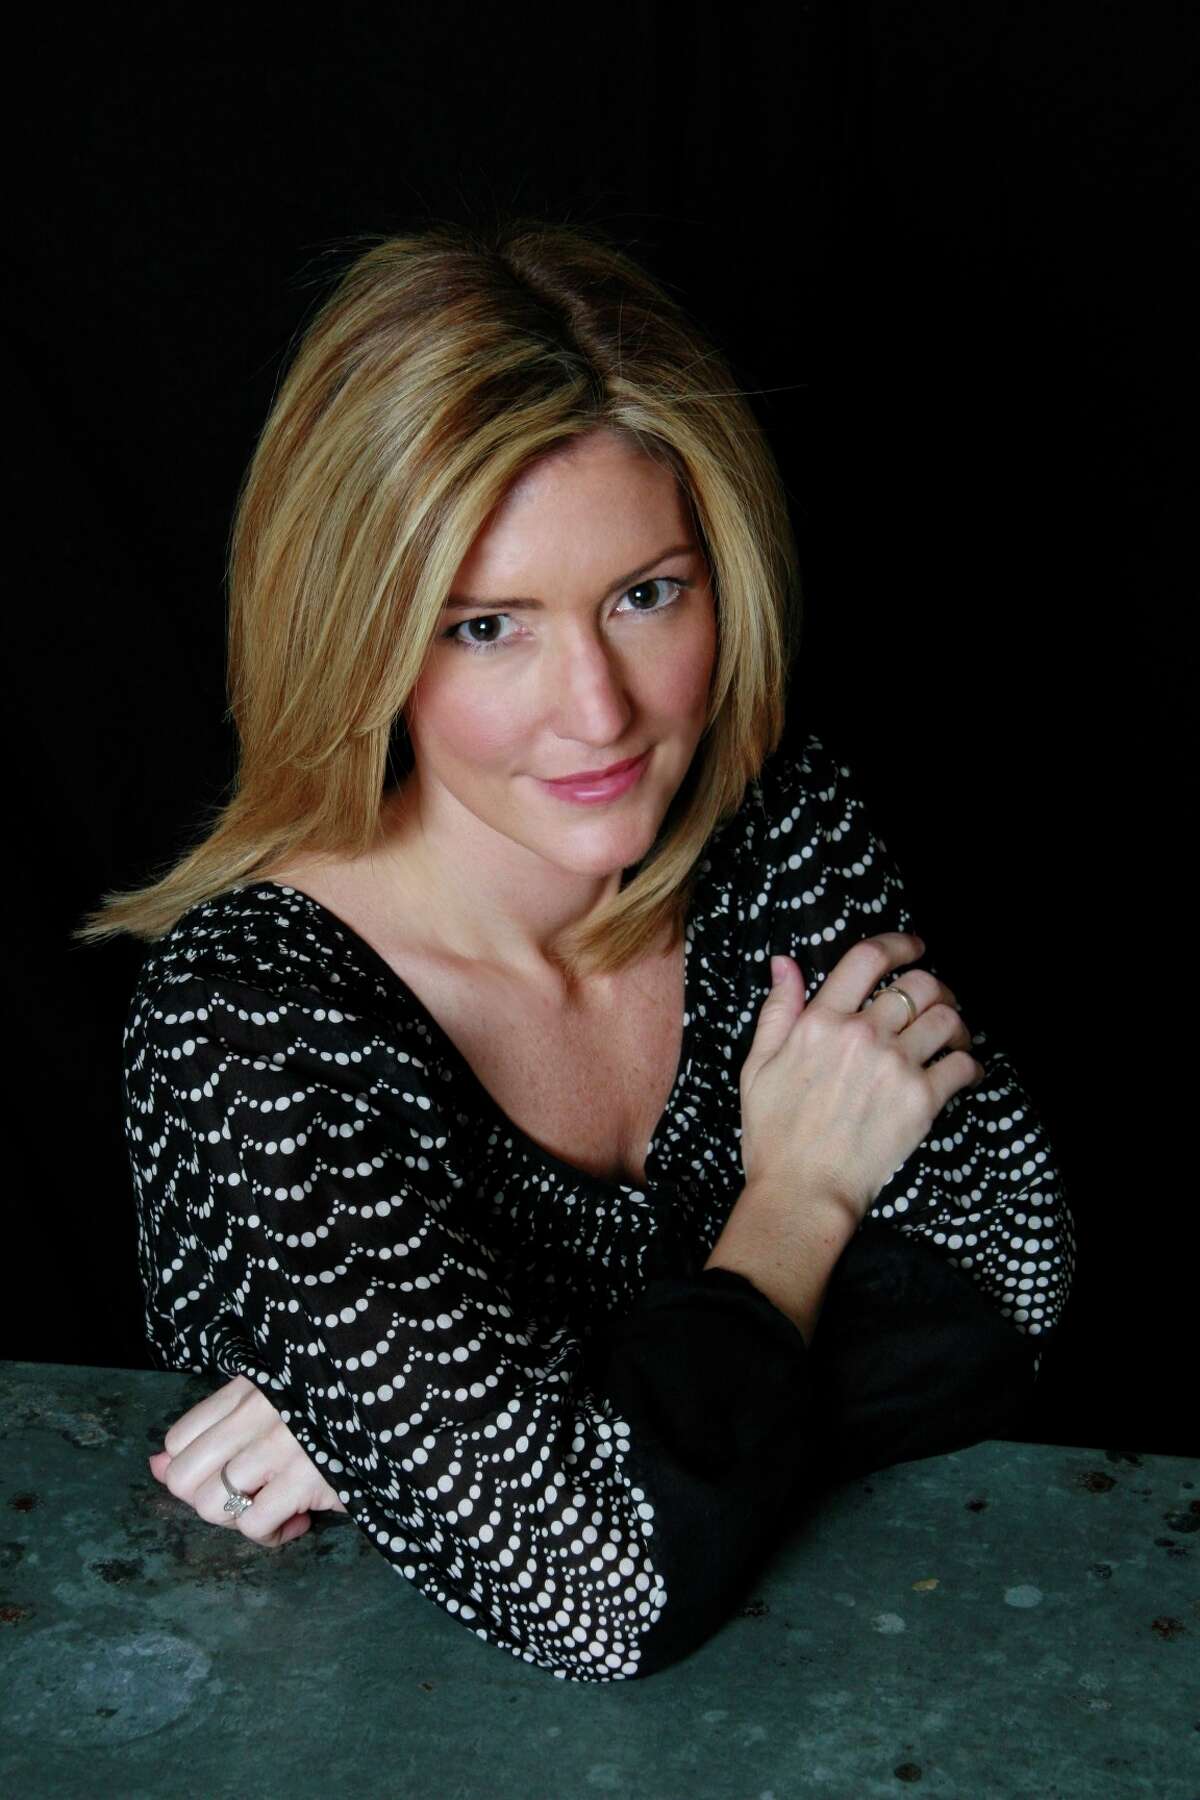 Kathryn Stockett received dozens of rejection letters before "The Help" was published.